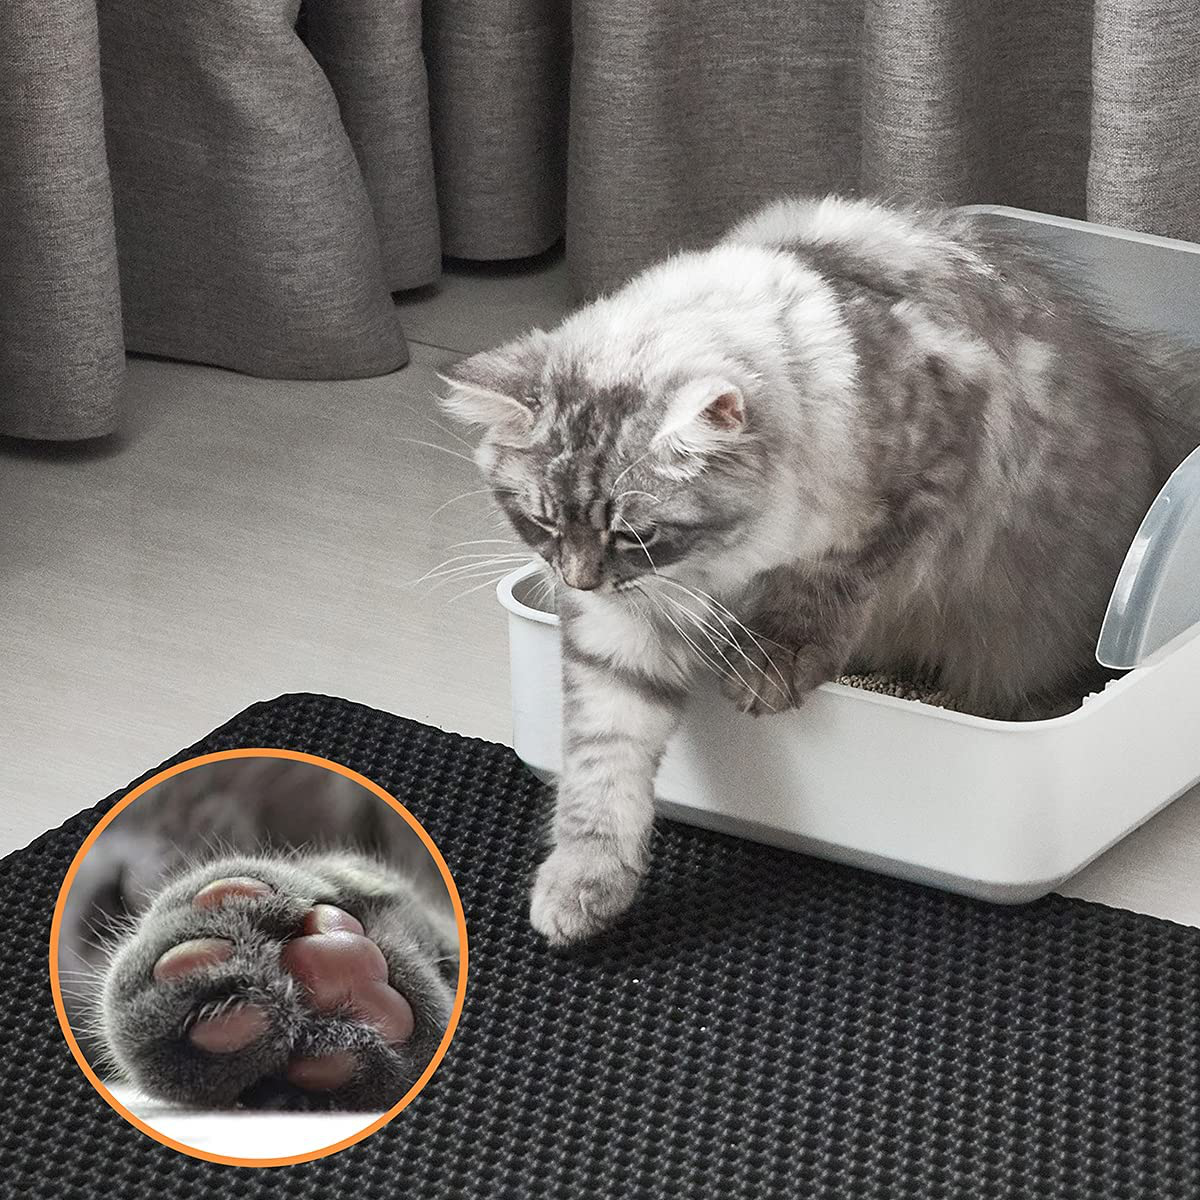 Conlun Cat Litter Mat Kitty Litter Trapping Mat Honeycomb Double Layer, Urine Waterproof, Easier to Clean, Litter Box Mat Scatter Control, Less Waste, Soft on Paws, Non-Slip, 4 Sizes